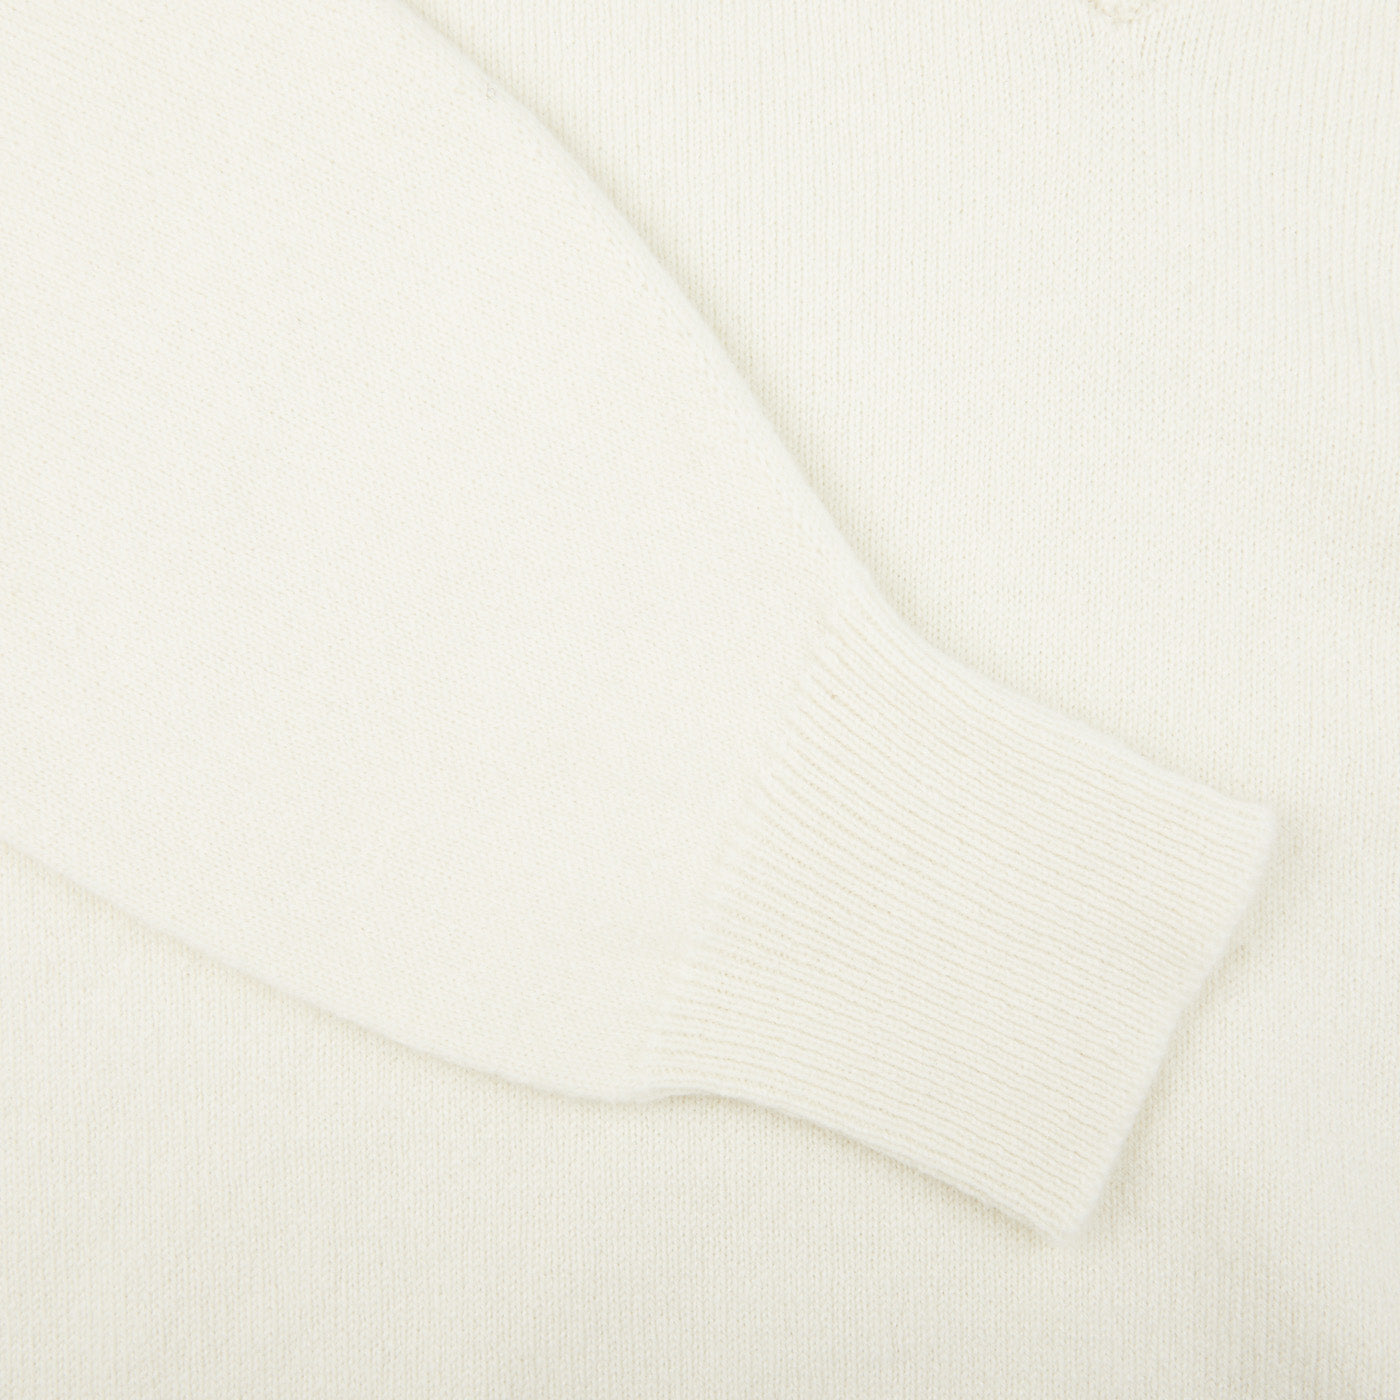 A close up image of a William Lockie Off-White Deep V-Neck Lambswool Sweater.